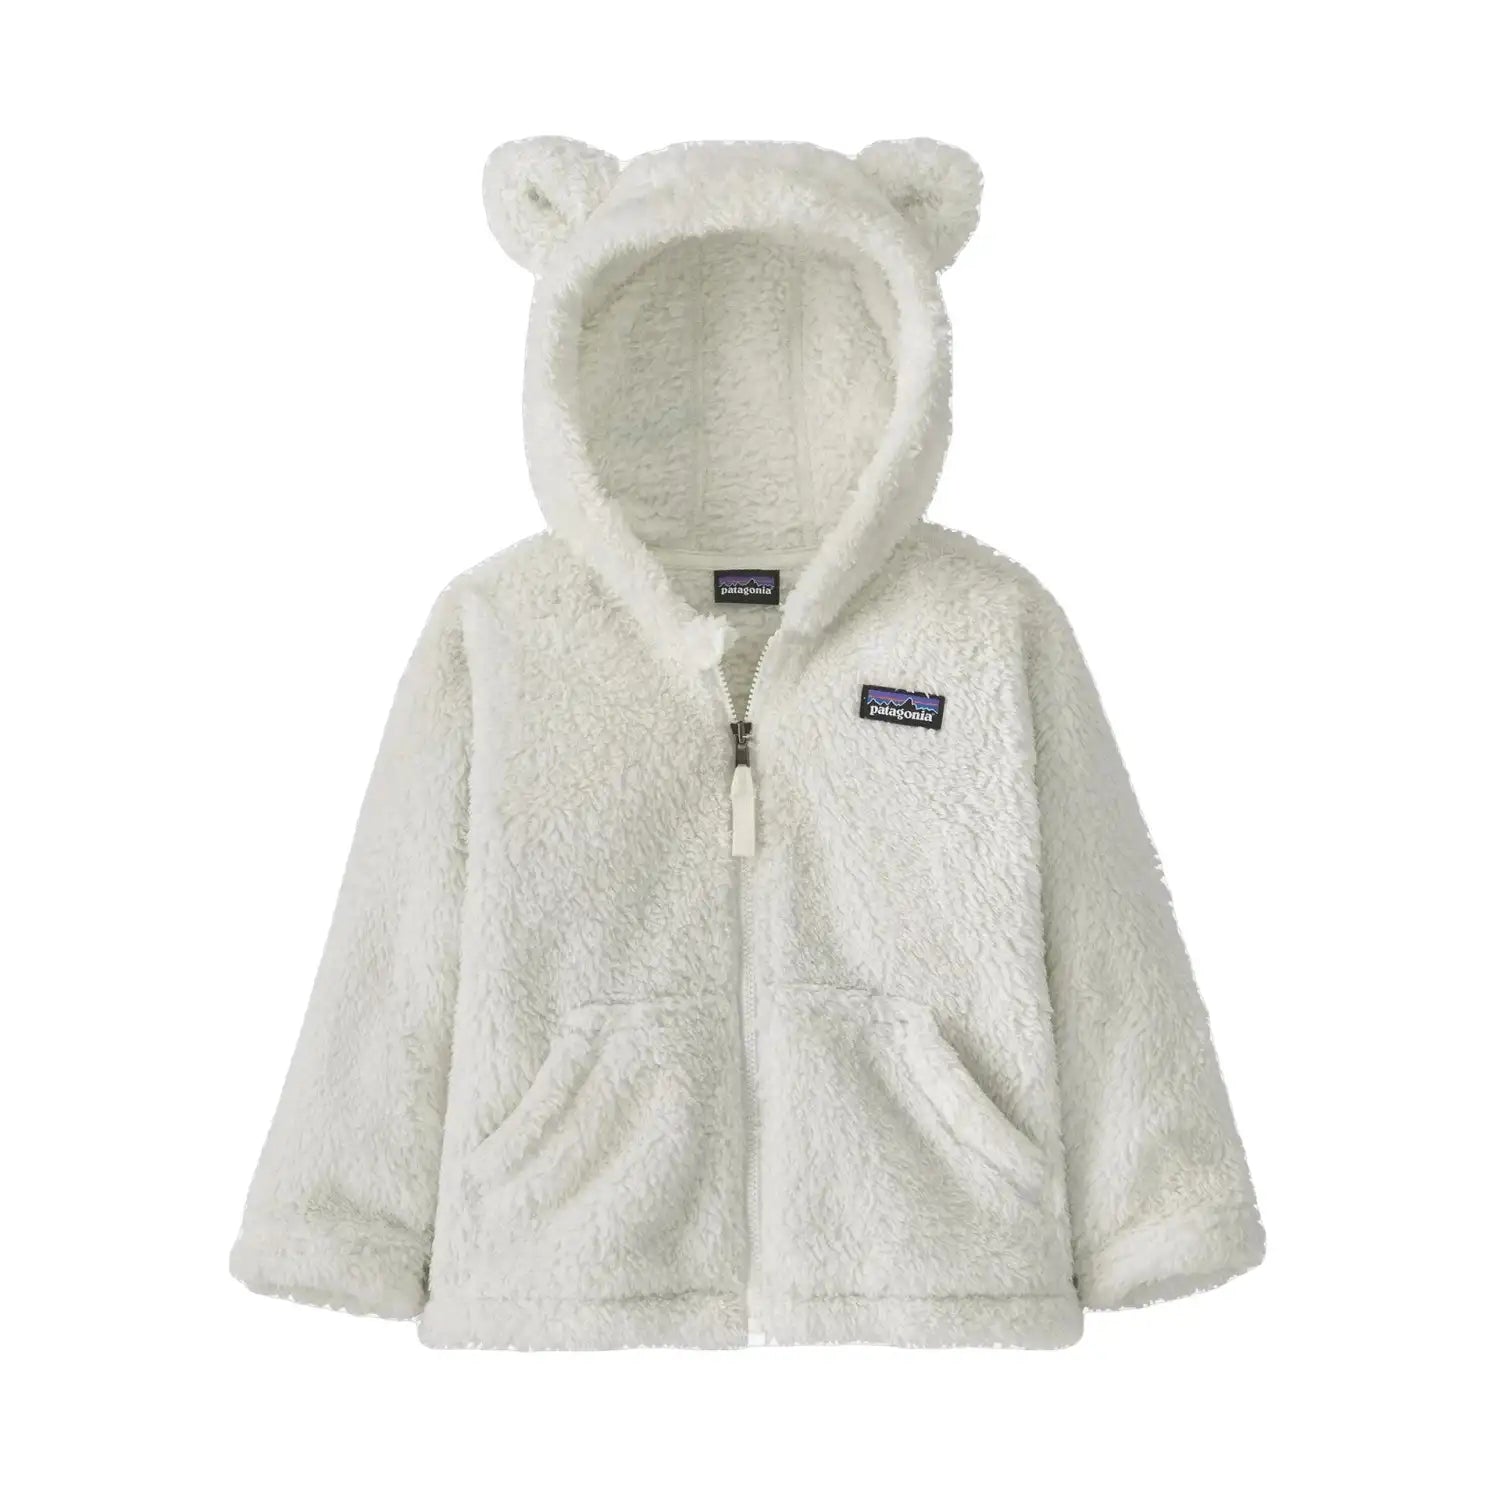 Patagonia Baby Furry Friends Fleece Hoody, Birch White, front view